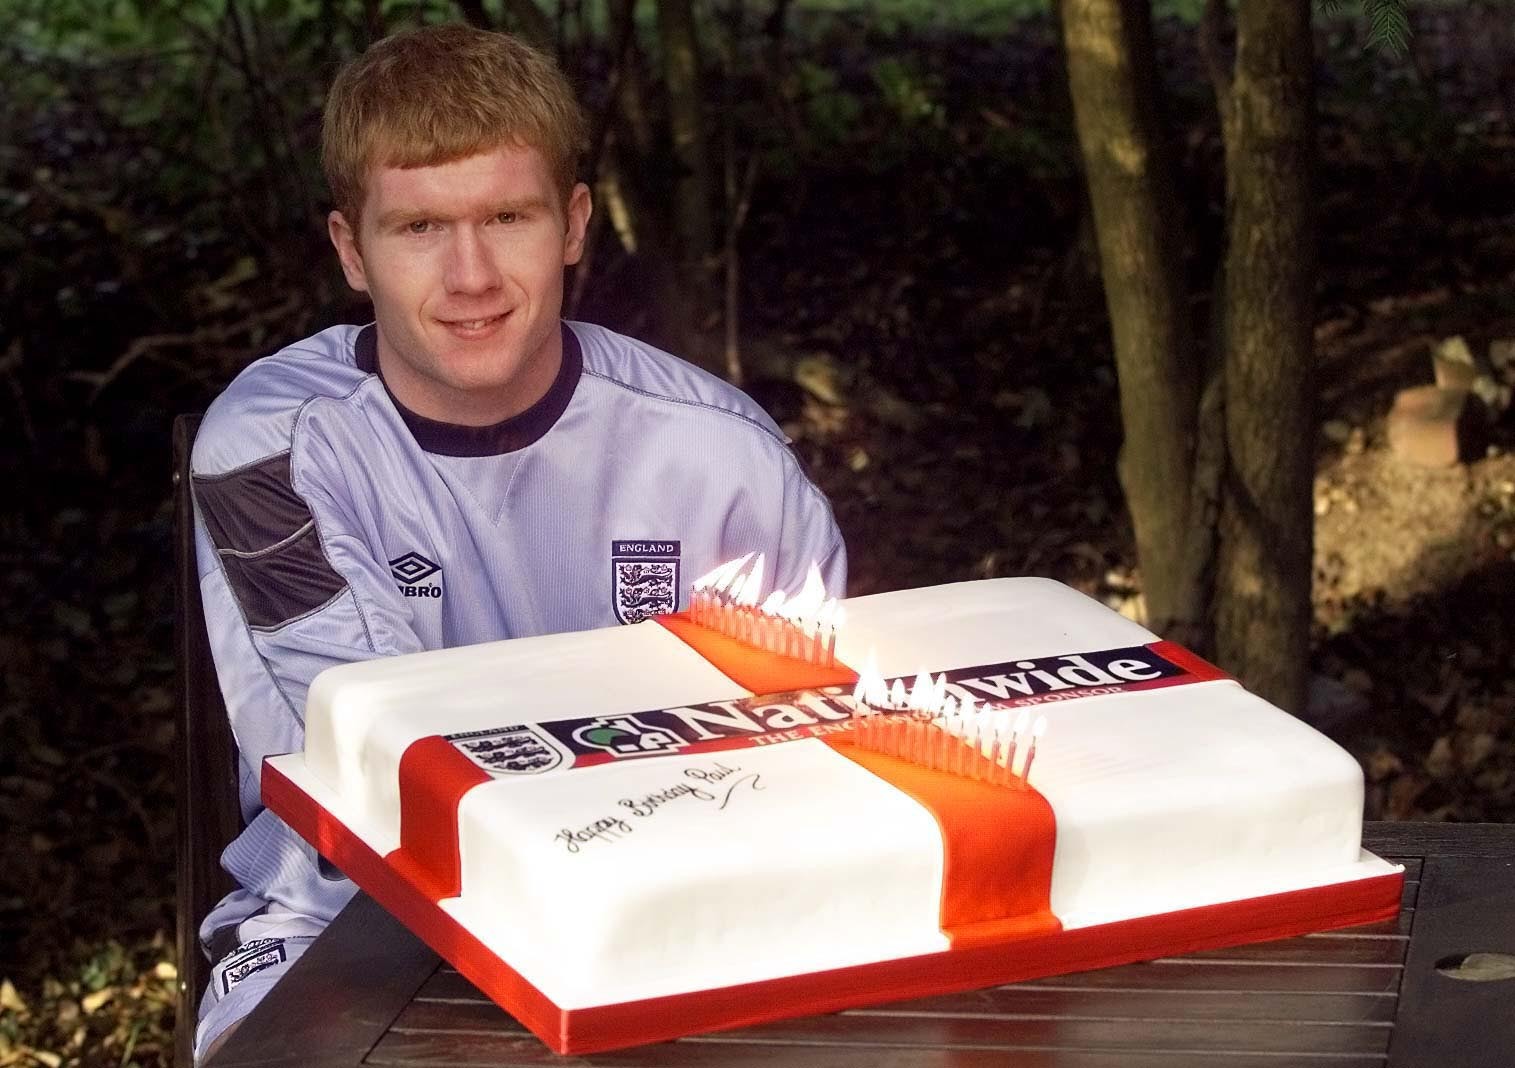 Paul Scholes with a birthday cake